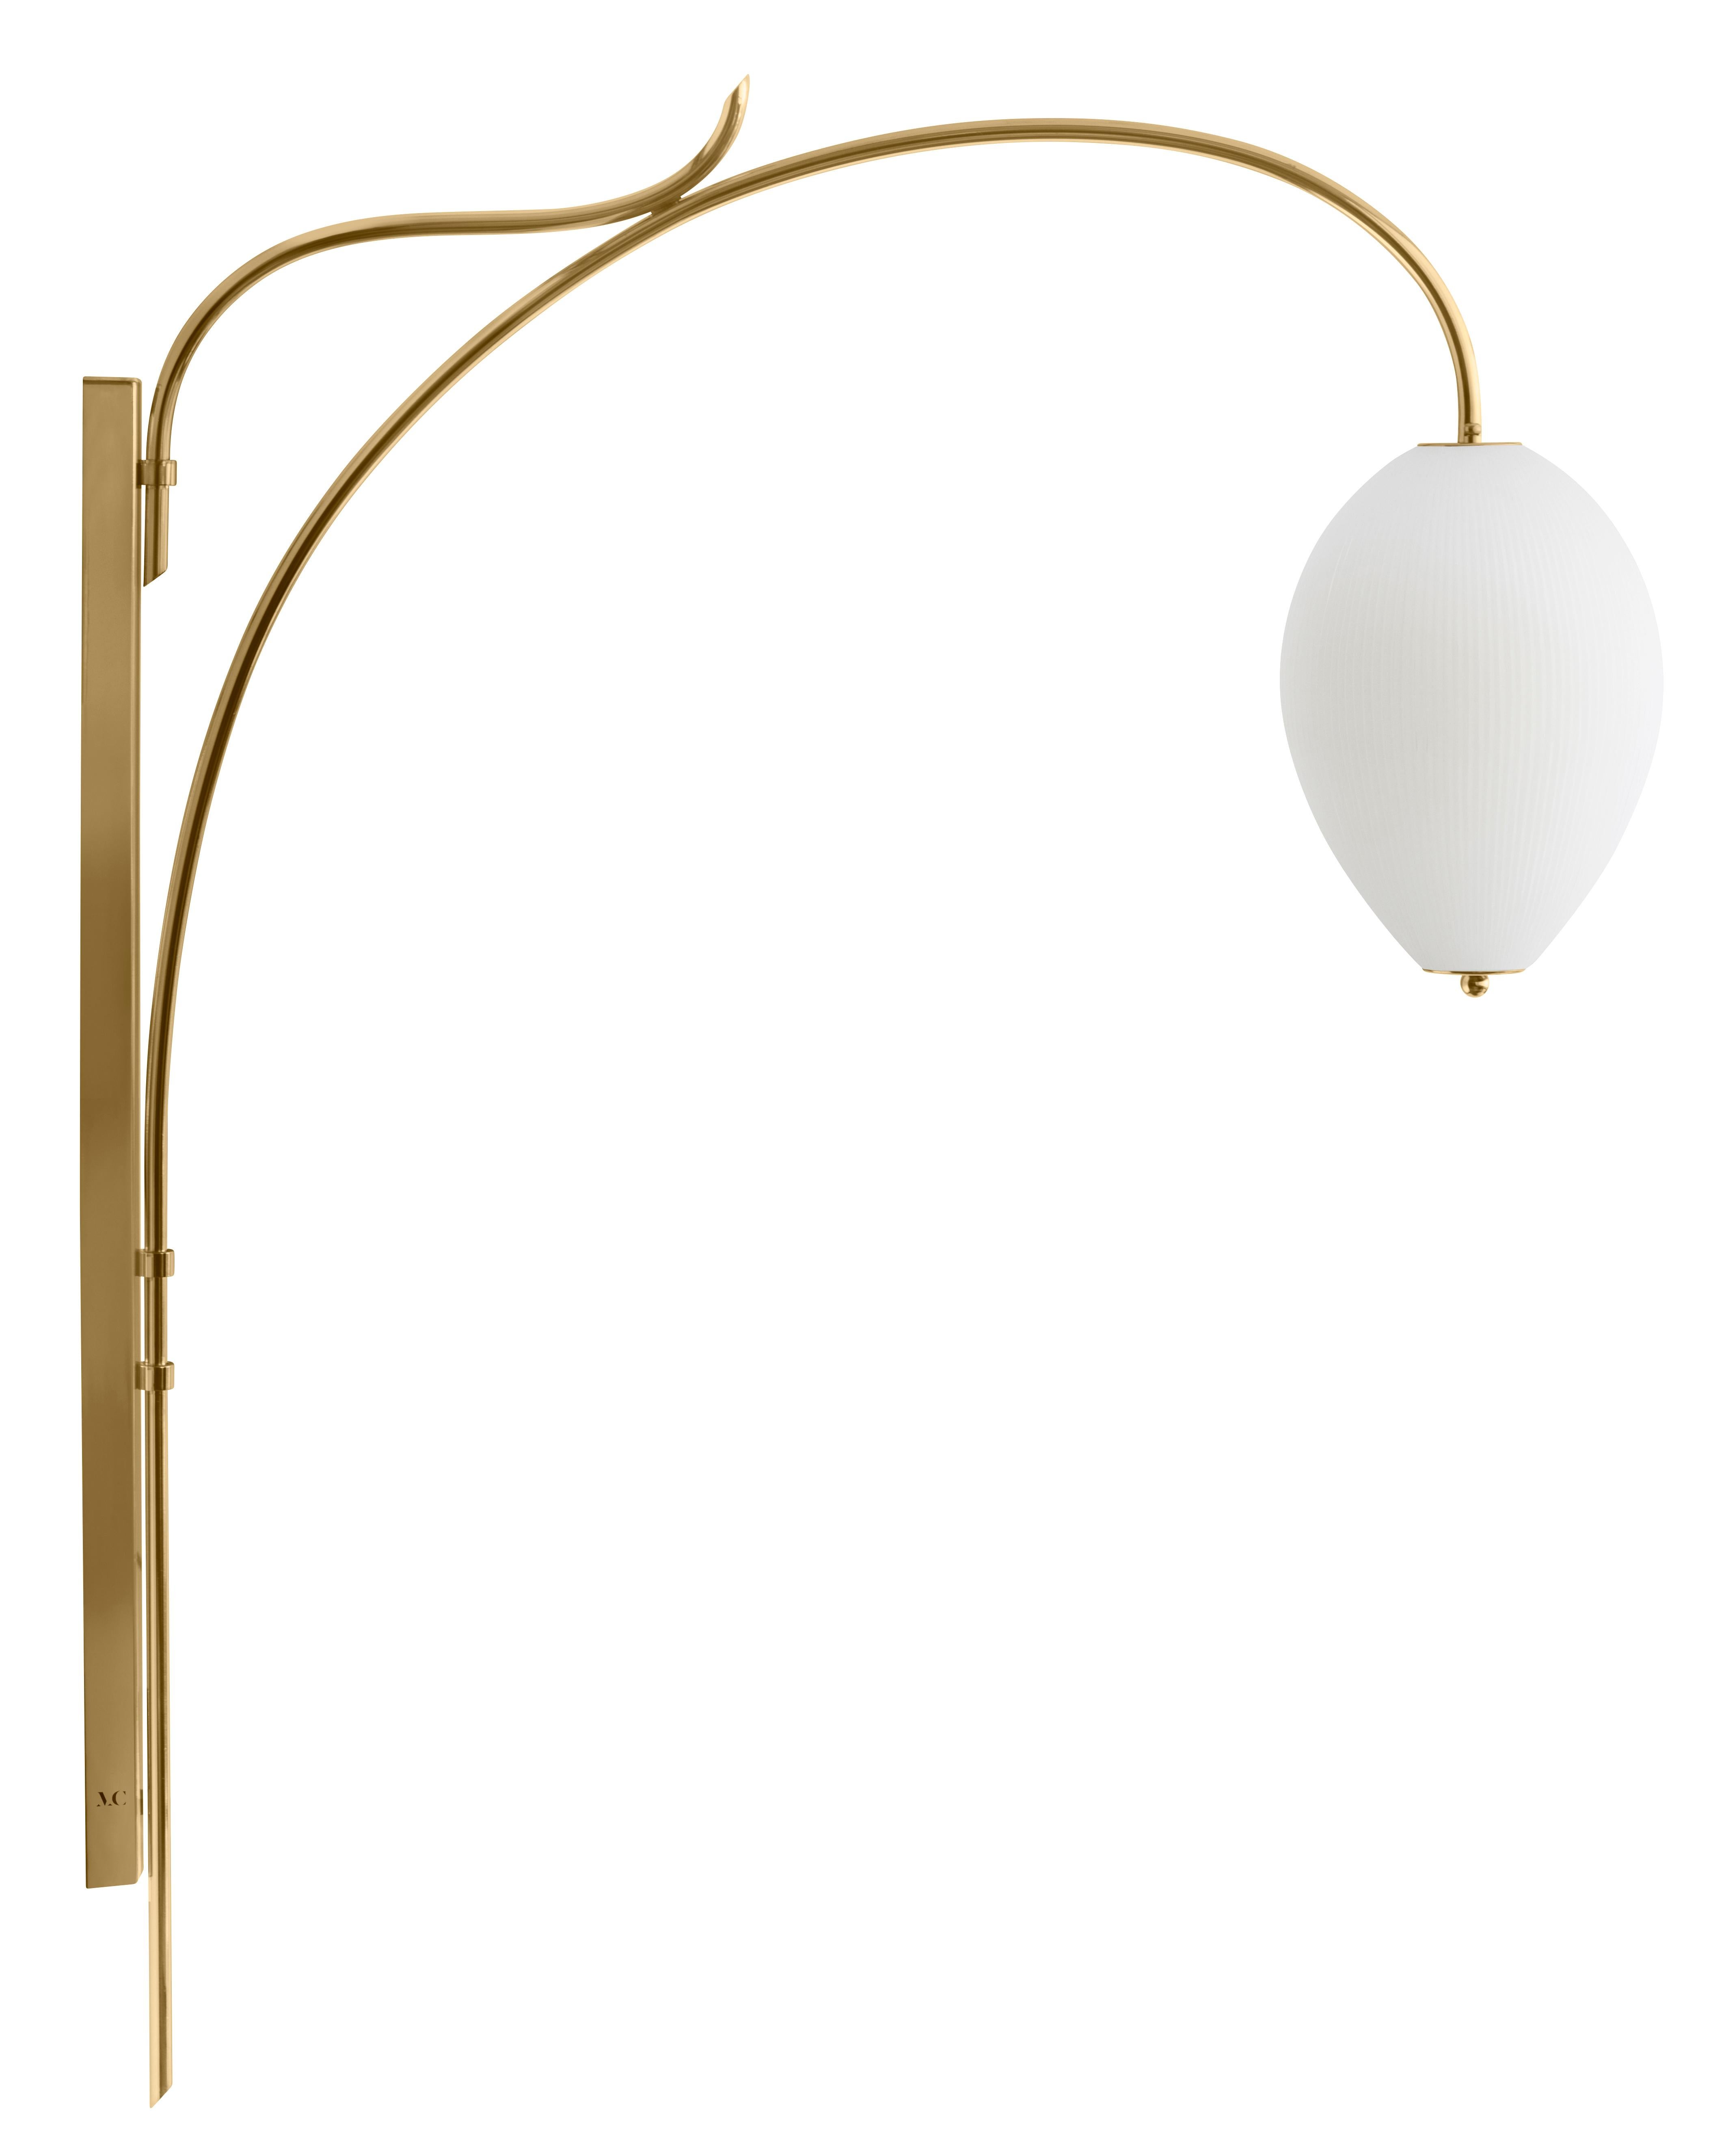 Wall lamp China 10 by Magic Circus Editions
Dimensions: H 134 x W 25.2 x D 113.5 cm
Materials: Brass, mouth blown glass sculpted with a diamond saw
Colour: enamel soft white

Available finishes: Brass, nickel
Available colours: enamel soft